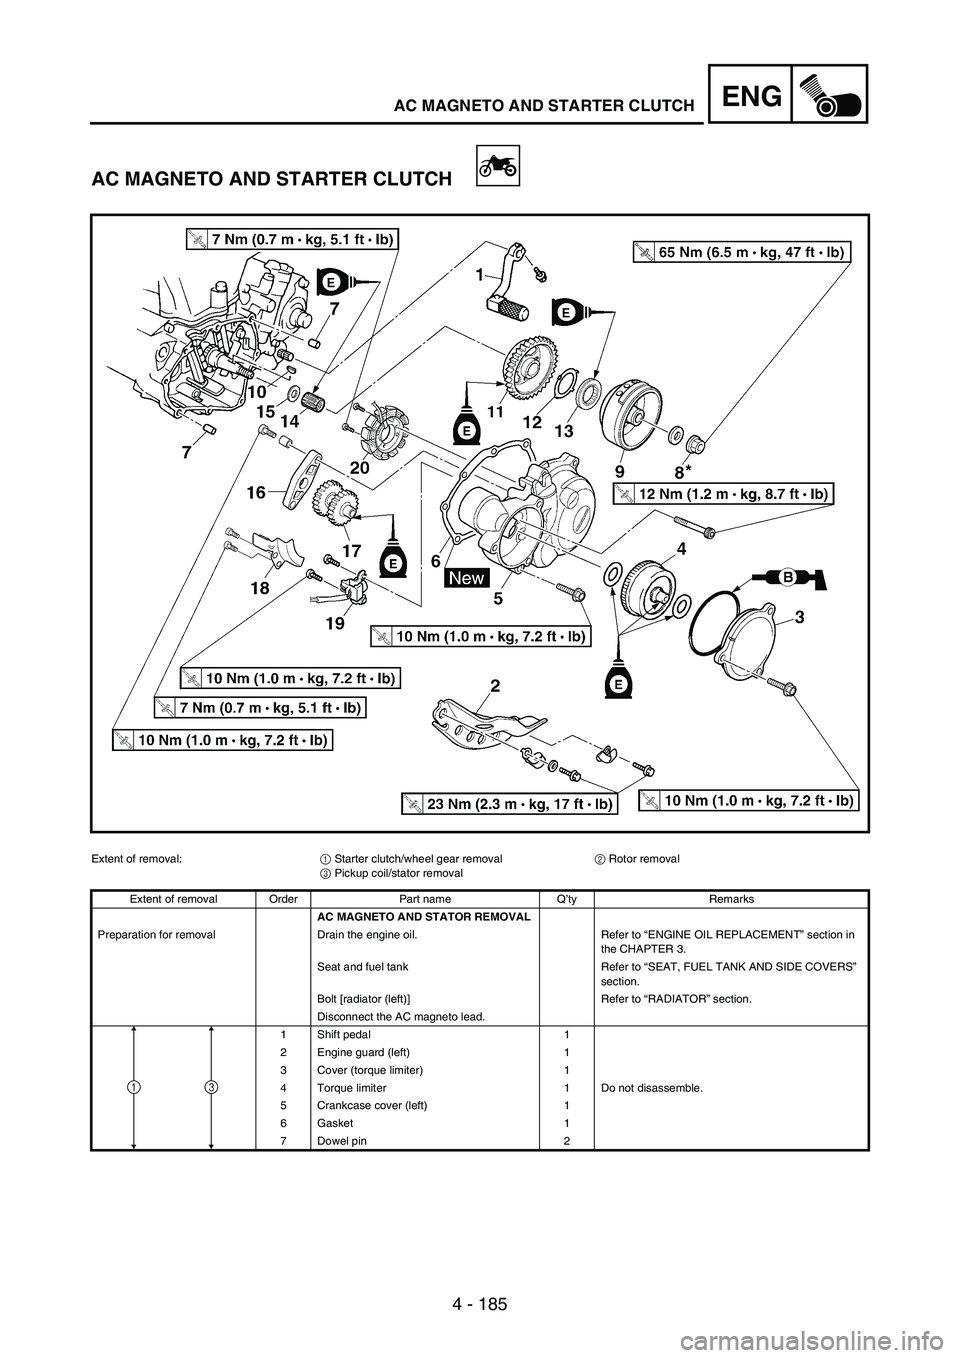 YAMAHA WR 250F 2005  Notices Demploi (in French) 4 - 185
ENGAC MAGNETO AND STARTER CLUTCH
AC MAGNETO AND STARTER CLUTCH
Extent of removal:
1 Starter clutch/wheel gear removal
2 Rotor removal
3 Pickup coil/stator removal
Extent of removal Order Part 